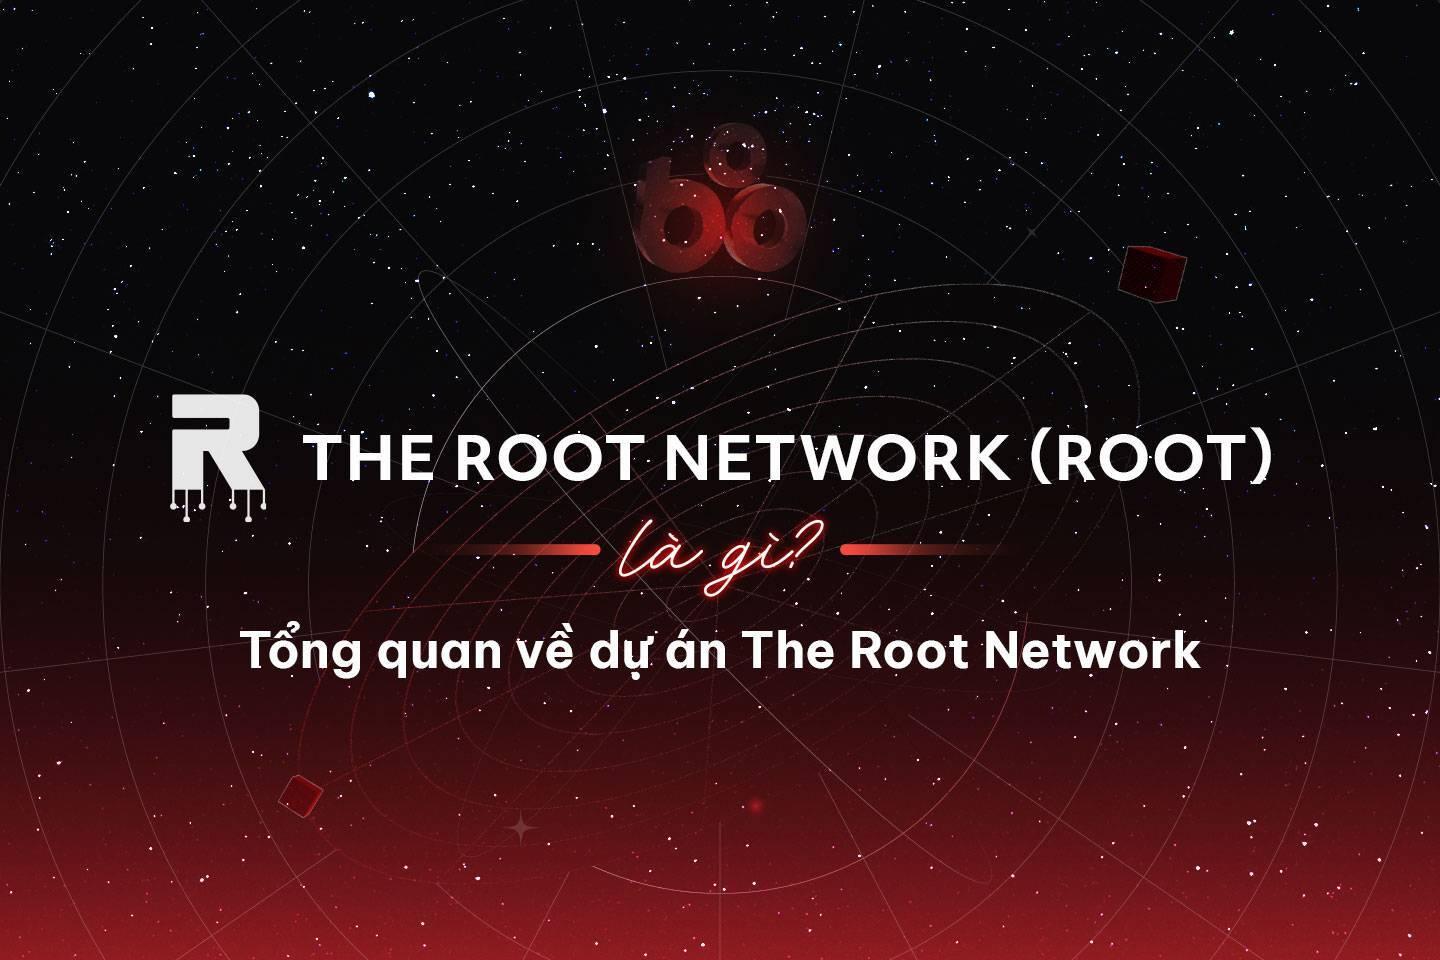 the-root-network-root-la-gi-tong-quan-ve-du-an-the-root-network